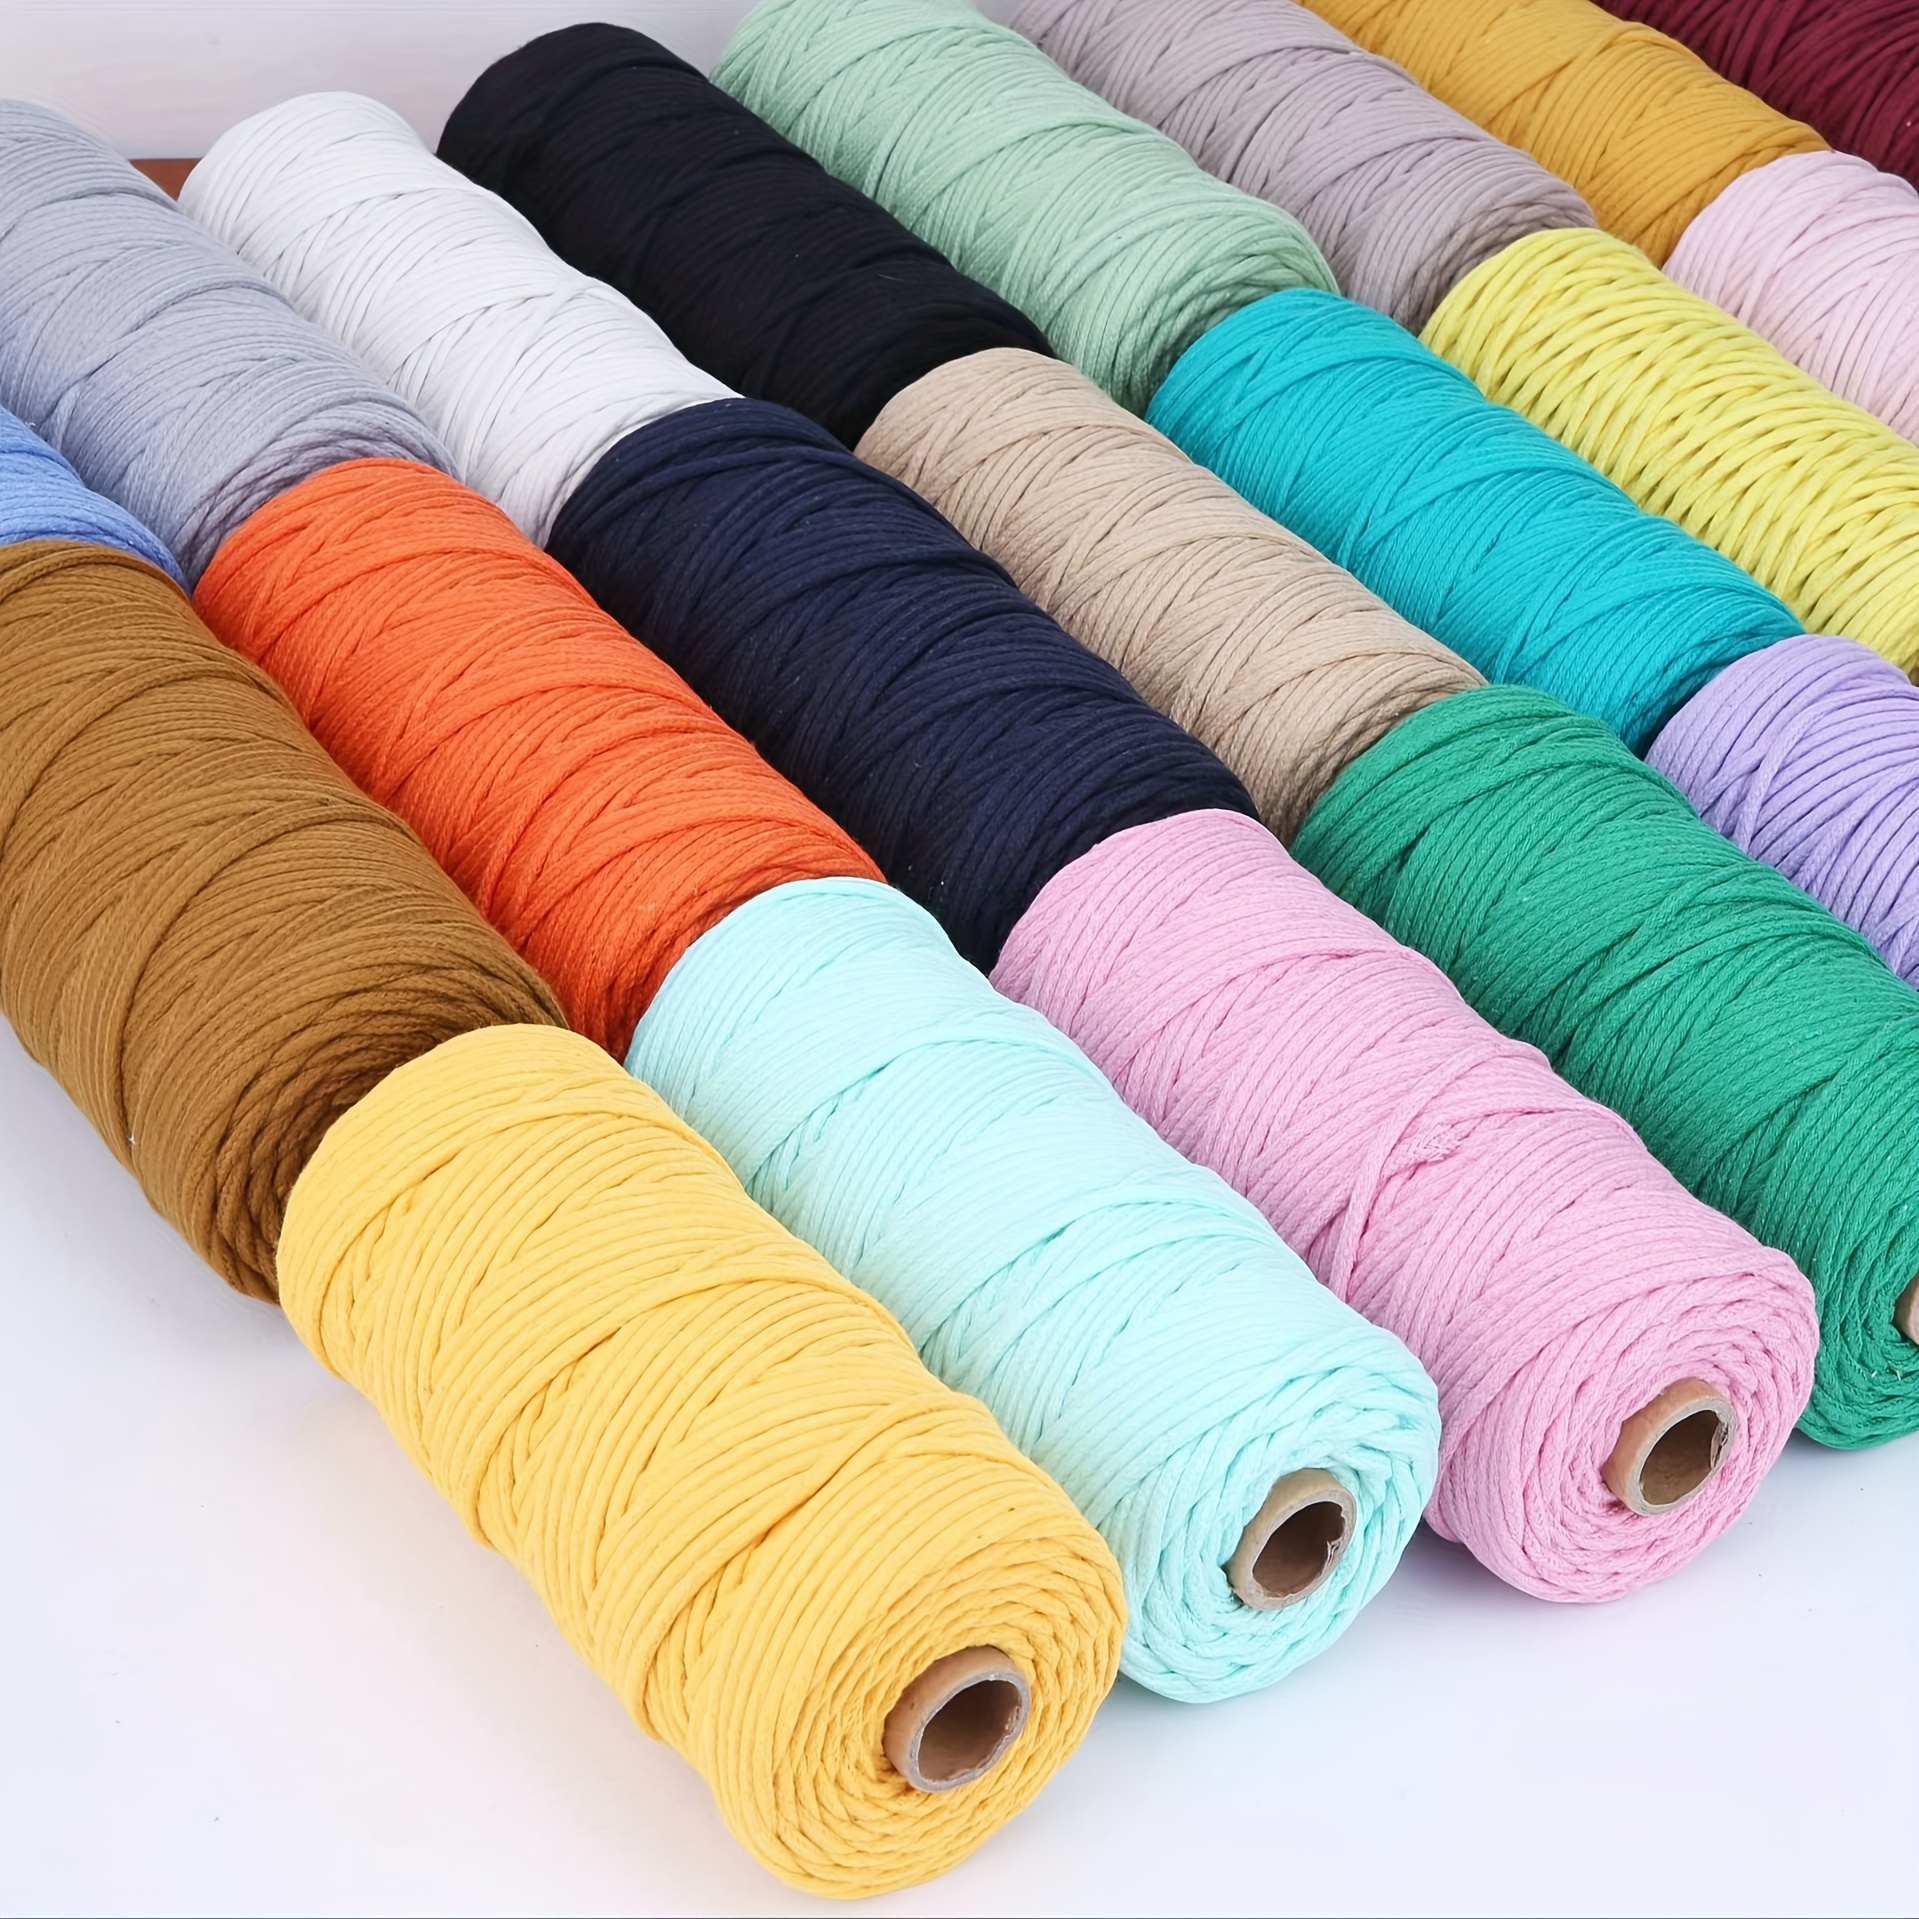 3mm 4mm 5mm 6mm Macrame Twisted String Cotton Cord For Handmade Natural  Beige Cords DIY Home